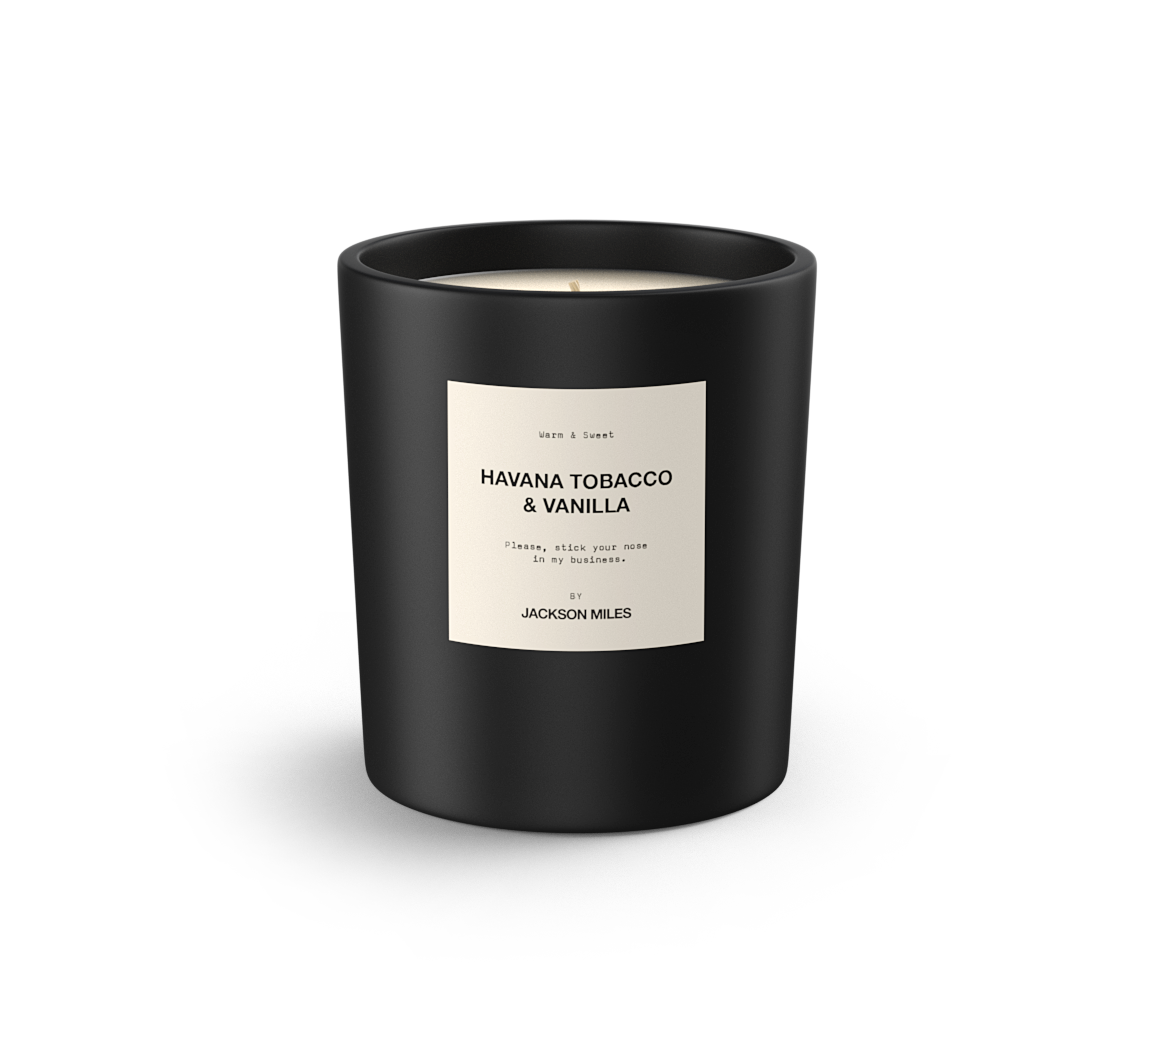 BEON.COM.AU You asked, we listened. Our limited edition, fresh tobacco and vanilla-scented 300ml soy wax candle.  Housed in a beautiful black vessel with a black lid, our candles are designed to fill small to medium-sized spaces with rustic, classy scents.  Burn time approximately 60 hours. Highly limited st... Jackson Miles at BEON.COM.AU